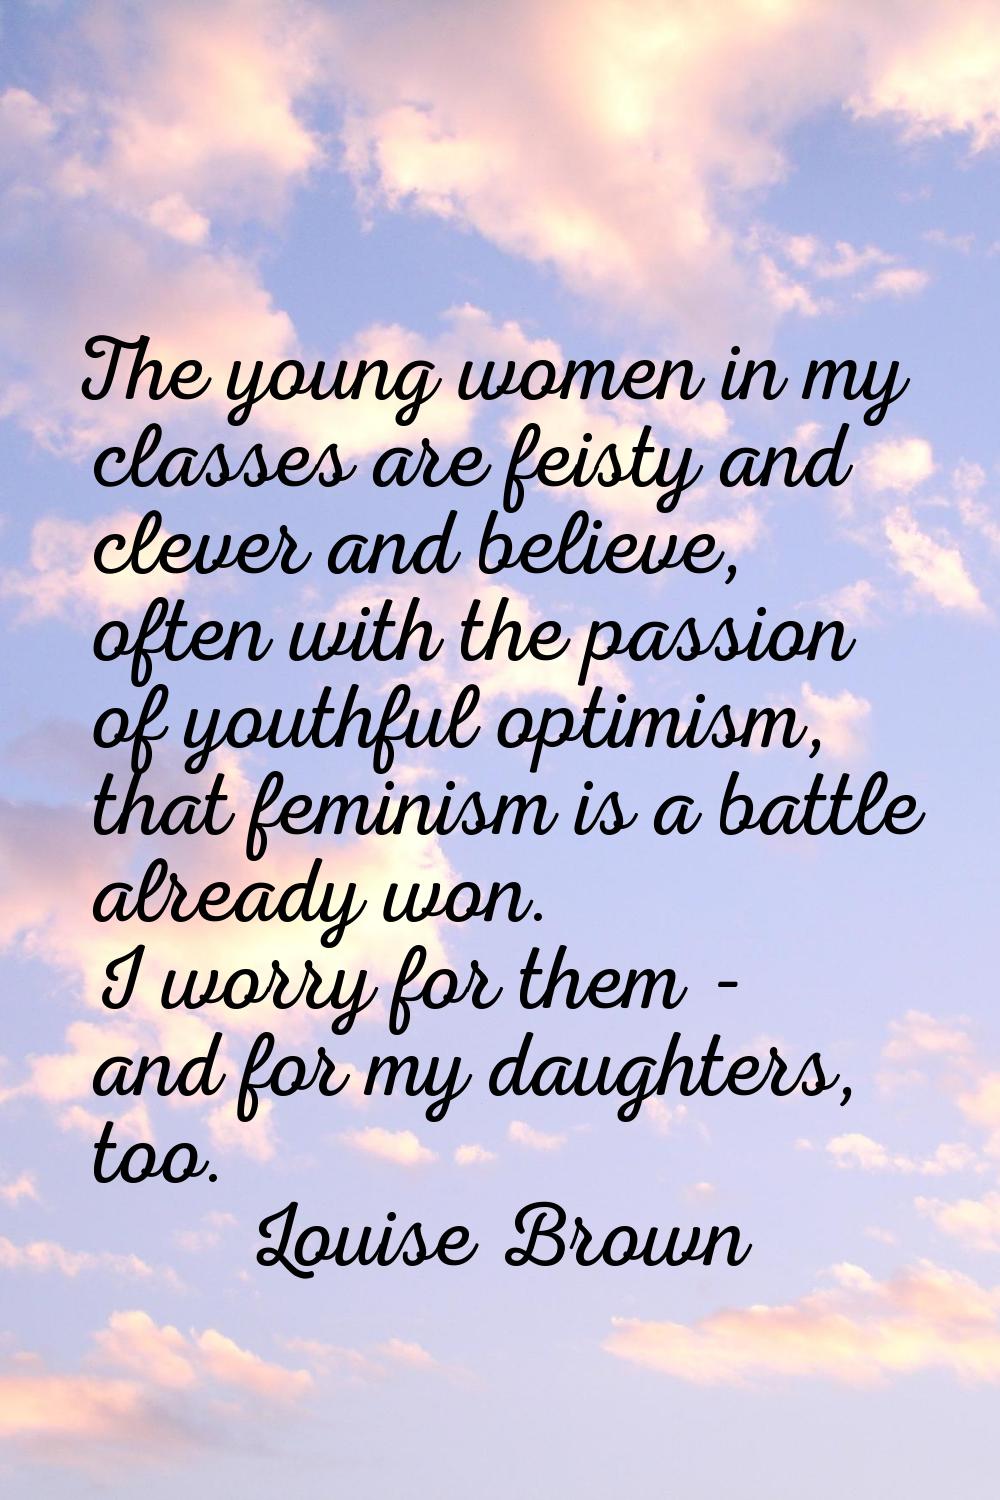 The young women in my classes are feisty and clever and believe, often with the passion of youthful